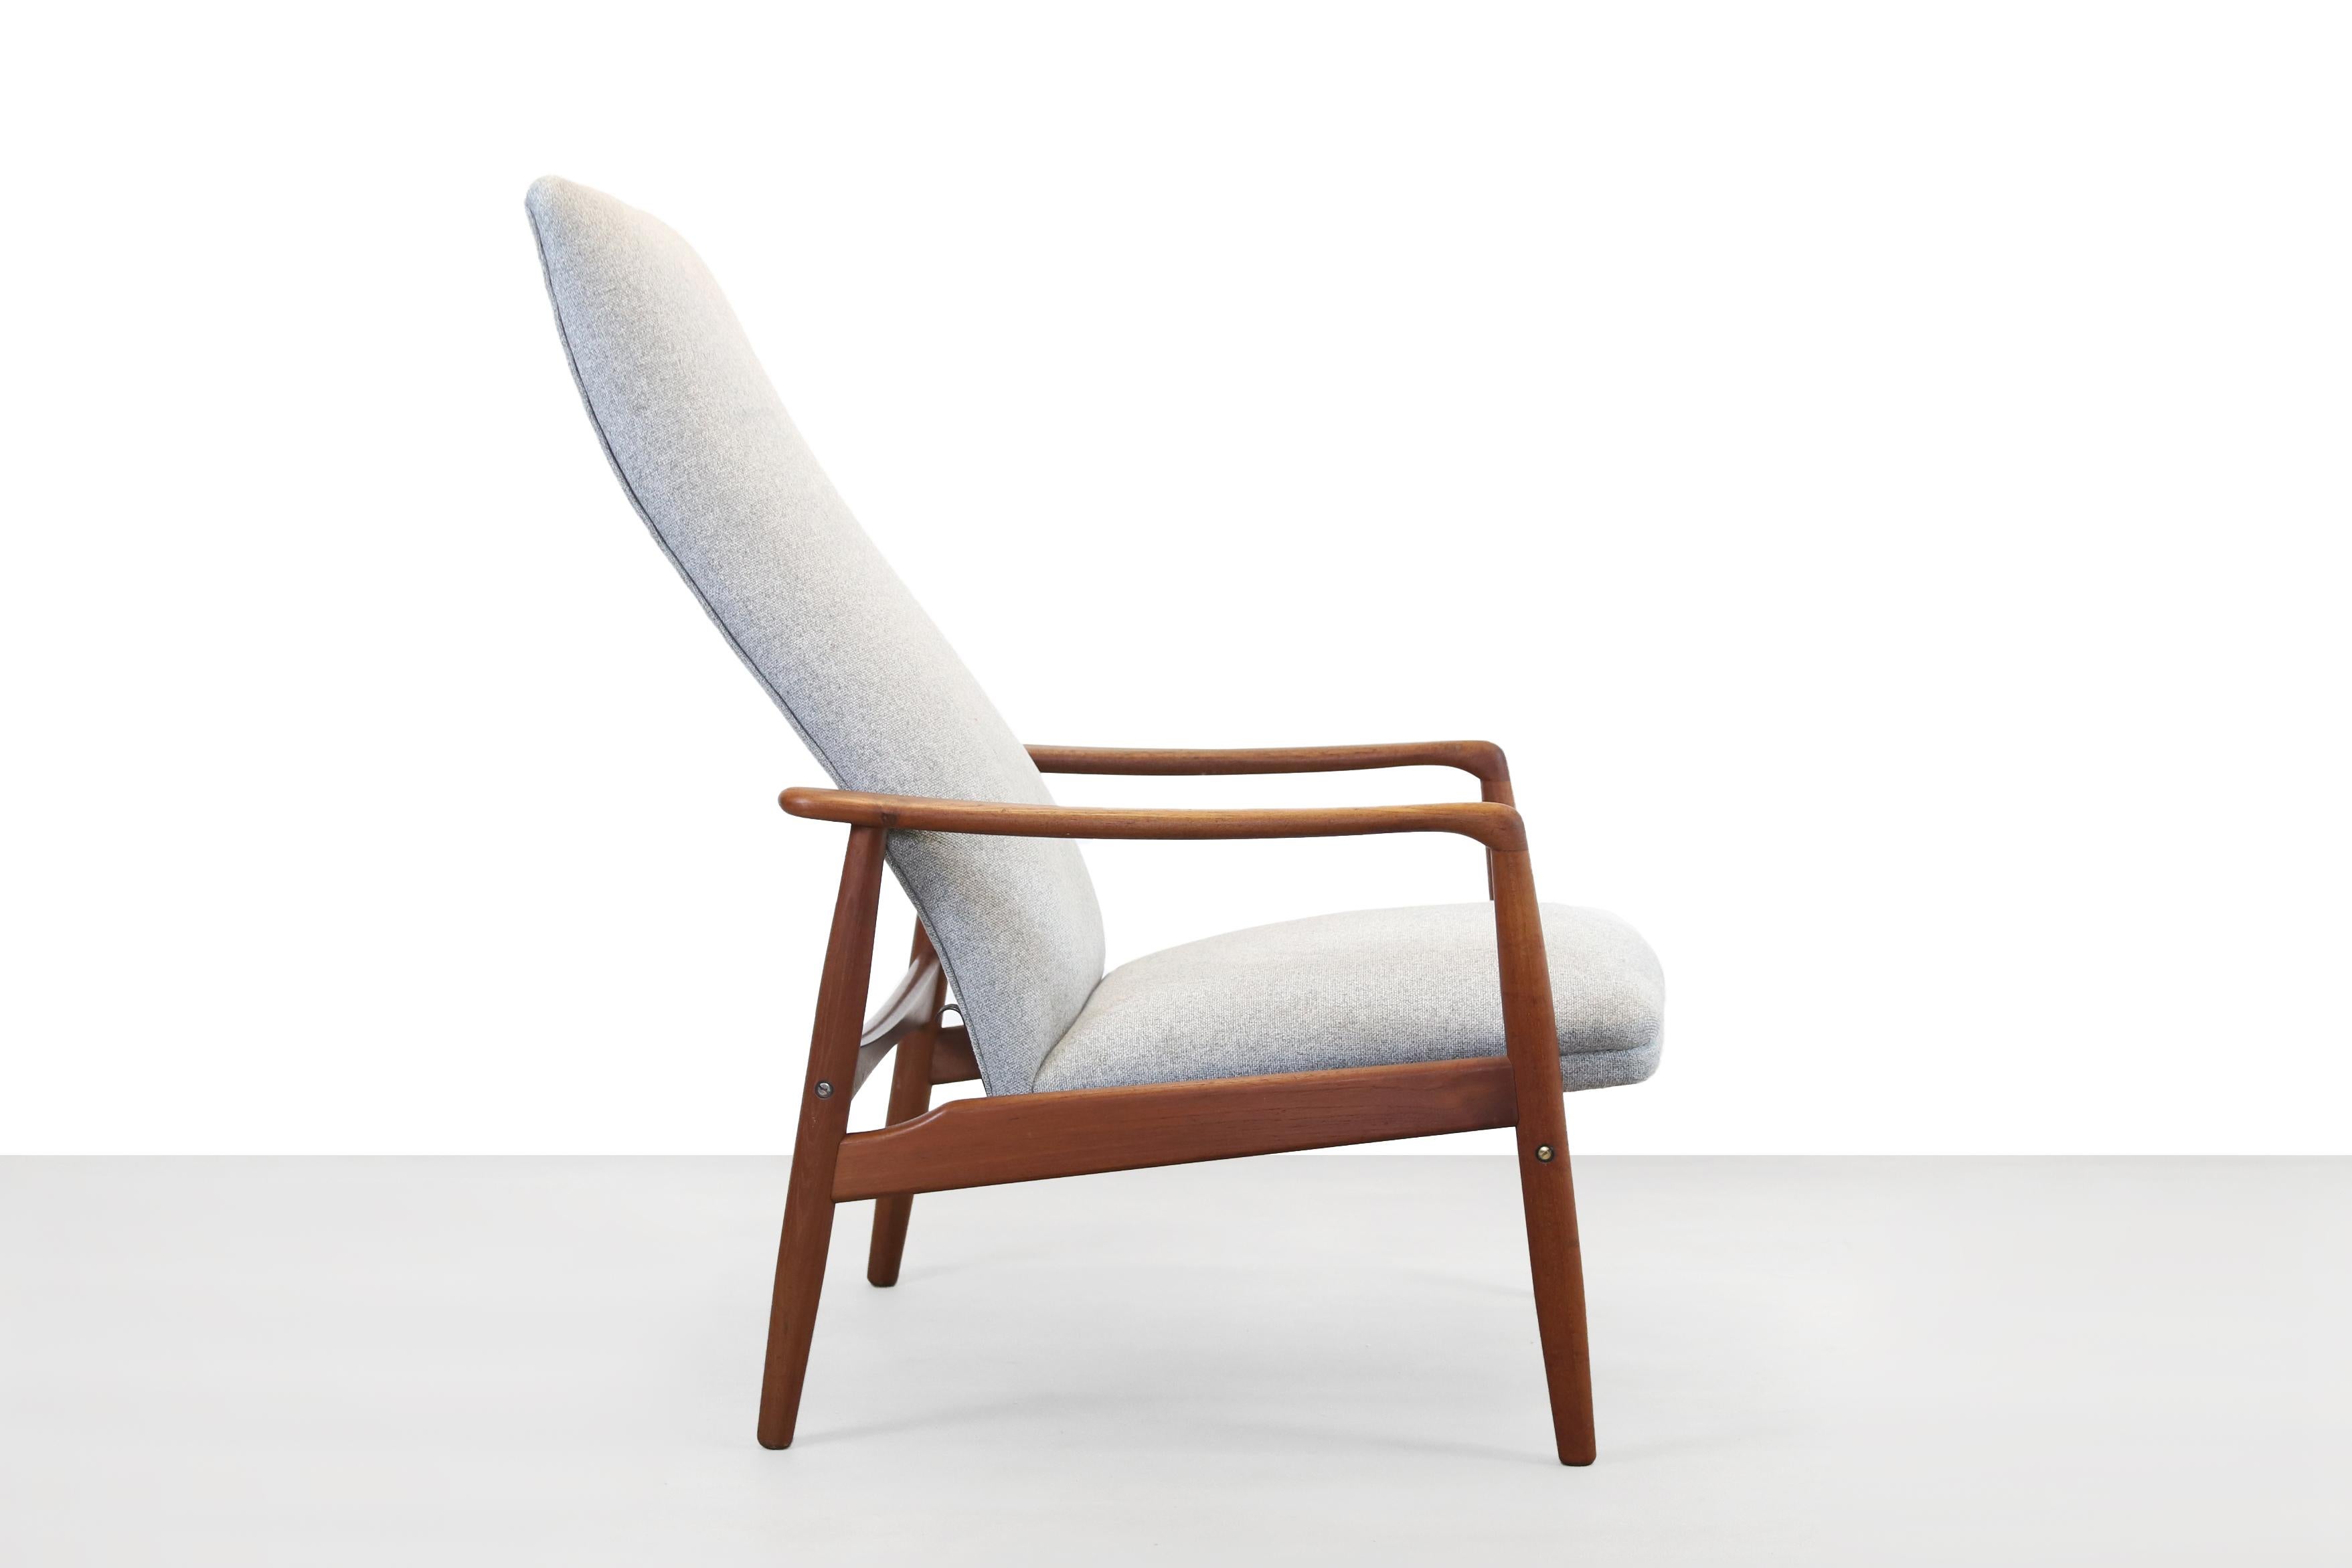 Organically shaped Danish design lounge chair designed by Søren Ladefoged and produced by his own manufacturer SL Møbler in the 1960s in Denmark. This high back armchair is not only beautiful to look at, but is also adjustable in two positions for a